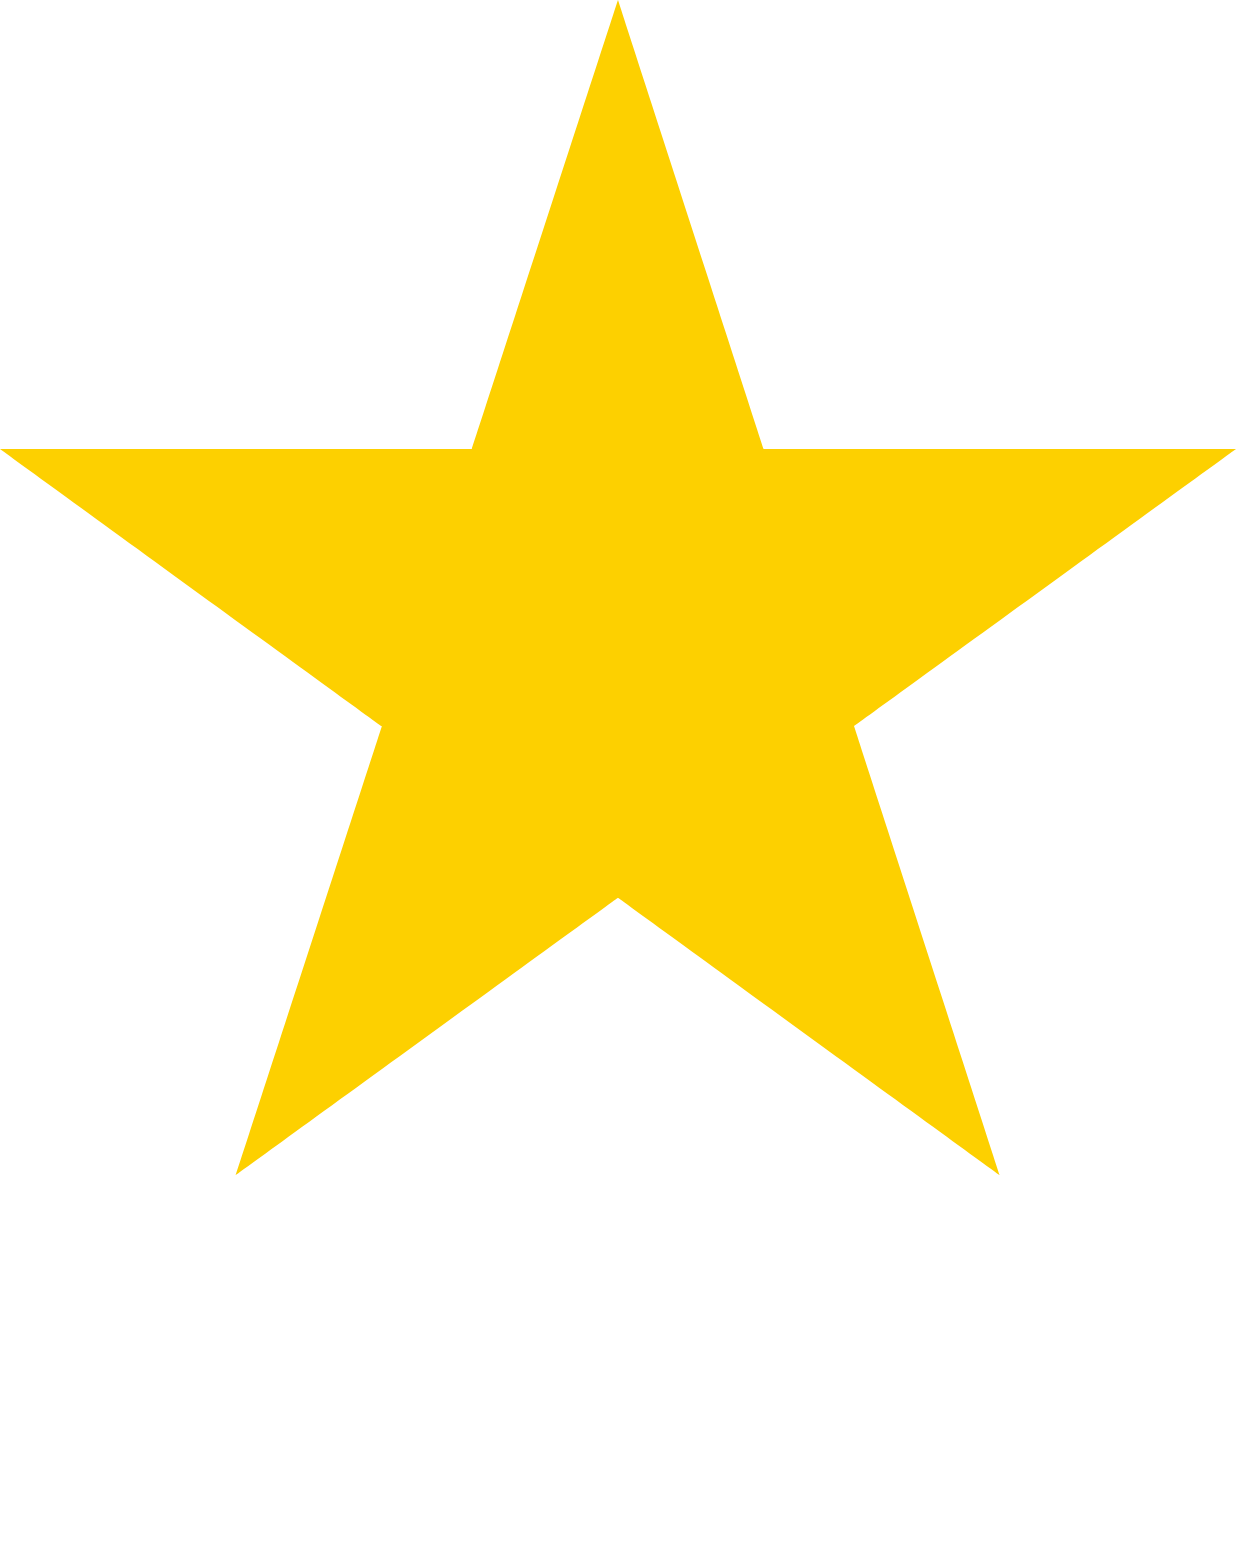 Sapporo logo large for dark backgrounds (transparent PNG)